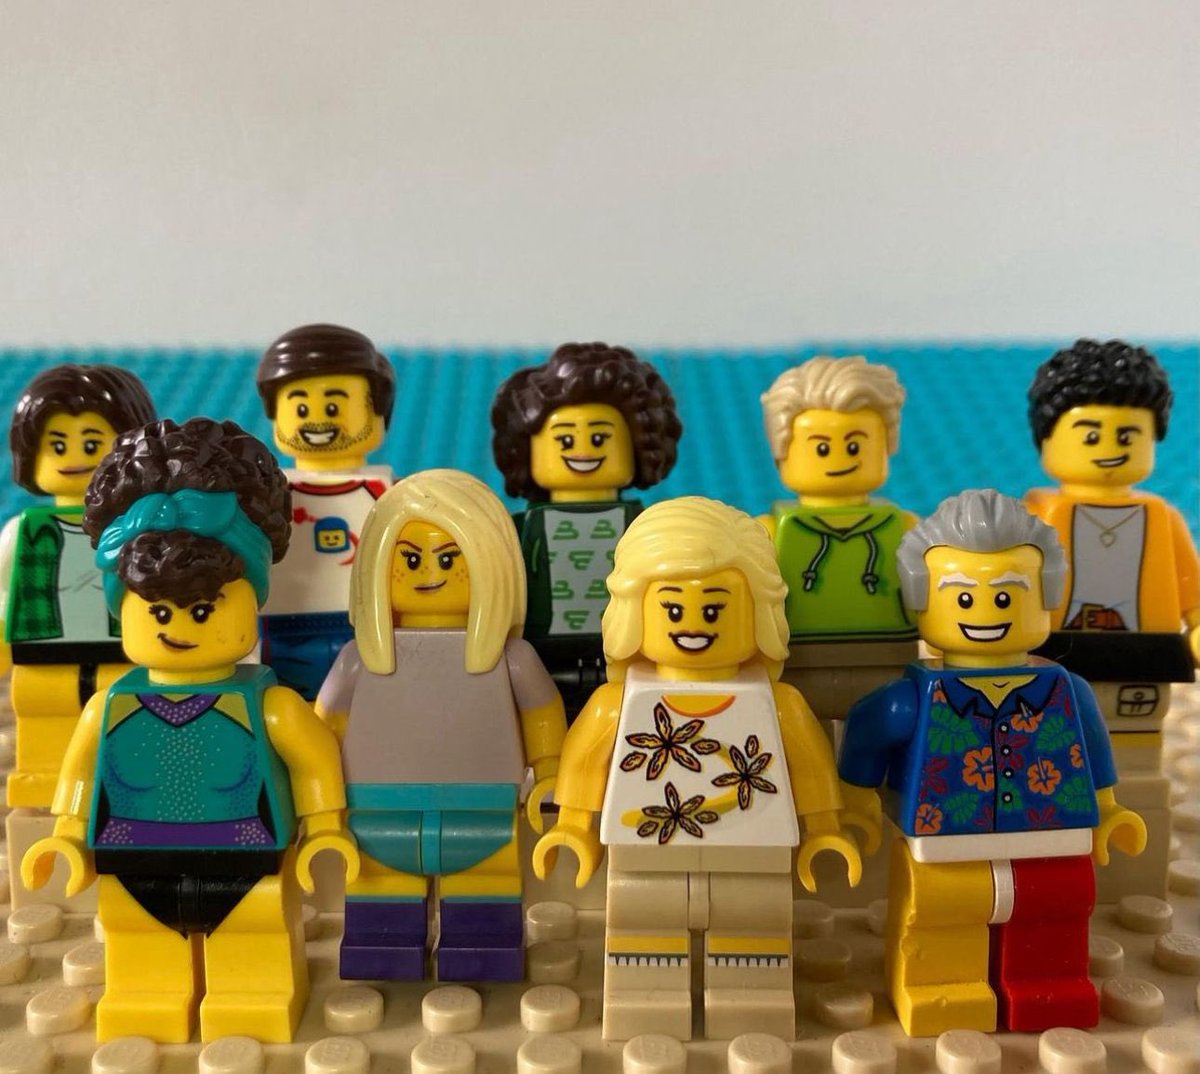 When you get your own @LEGO_Group La Nena figures…. Assuming the one at the front LHS is me?! #survivoruk